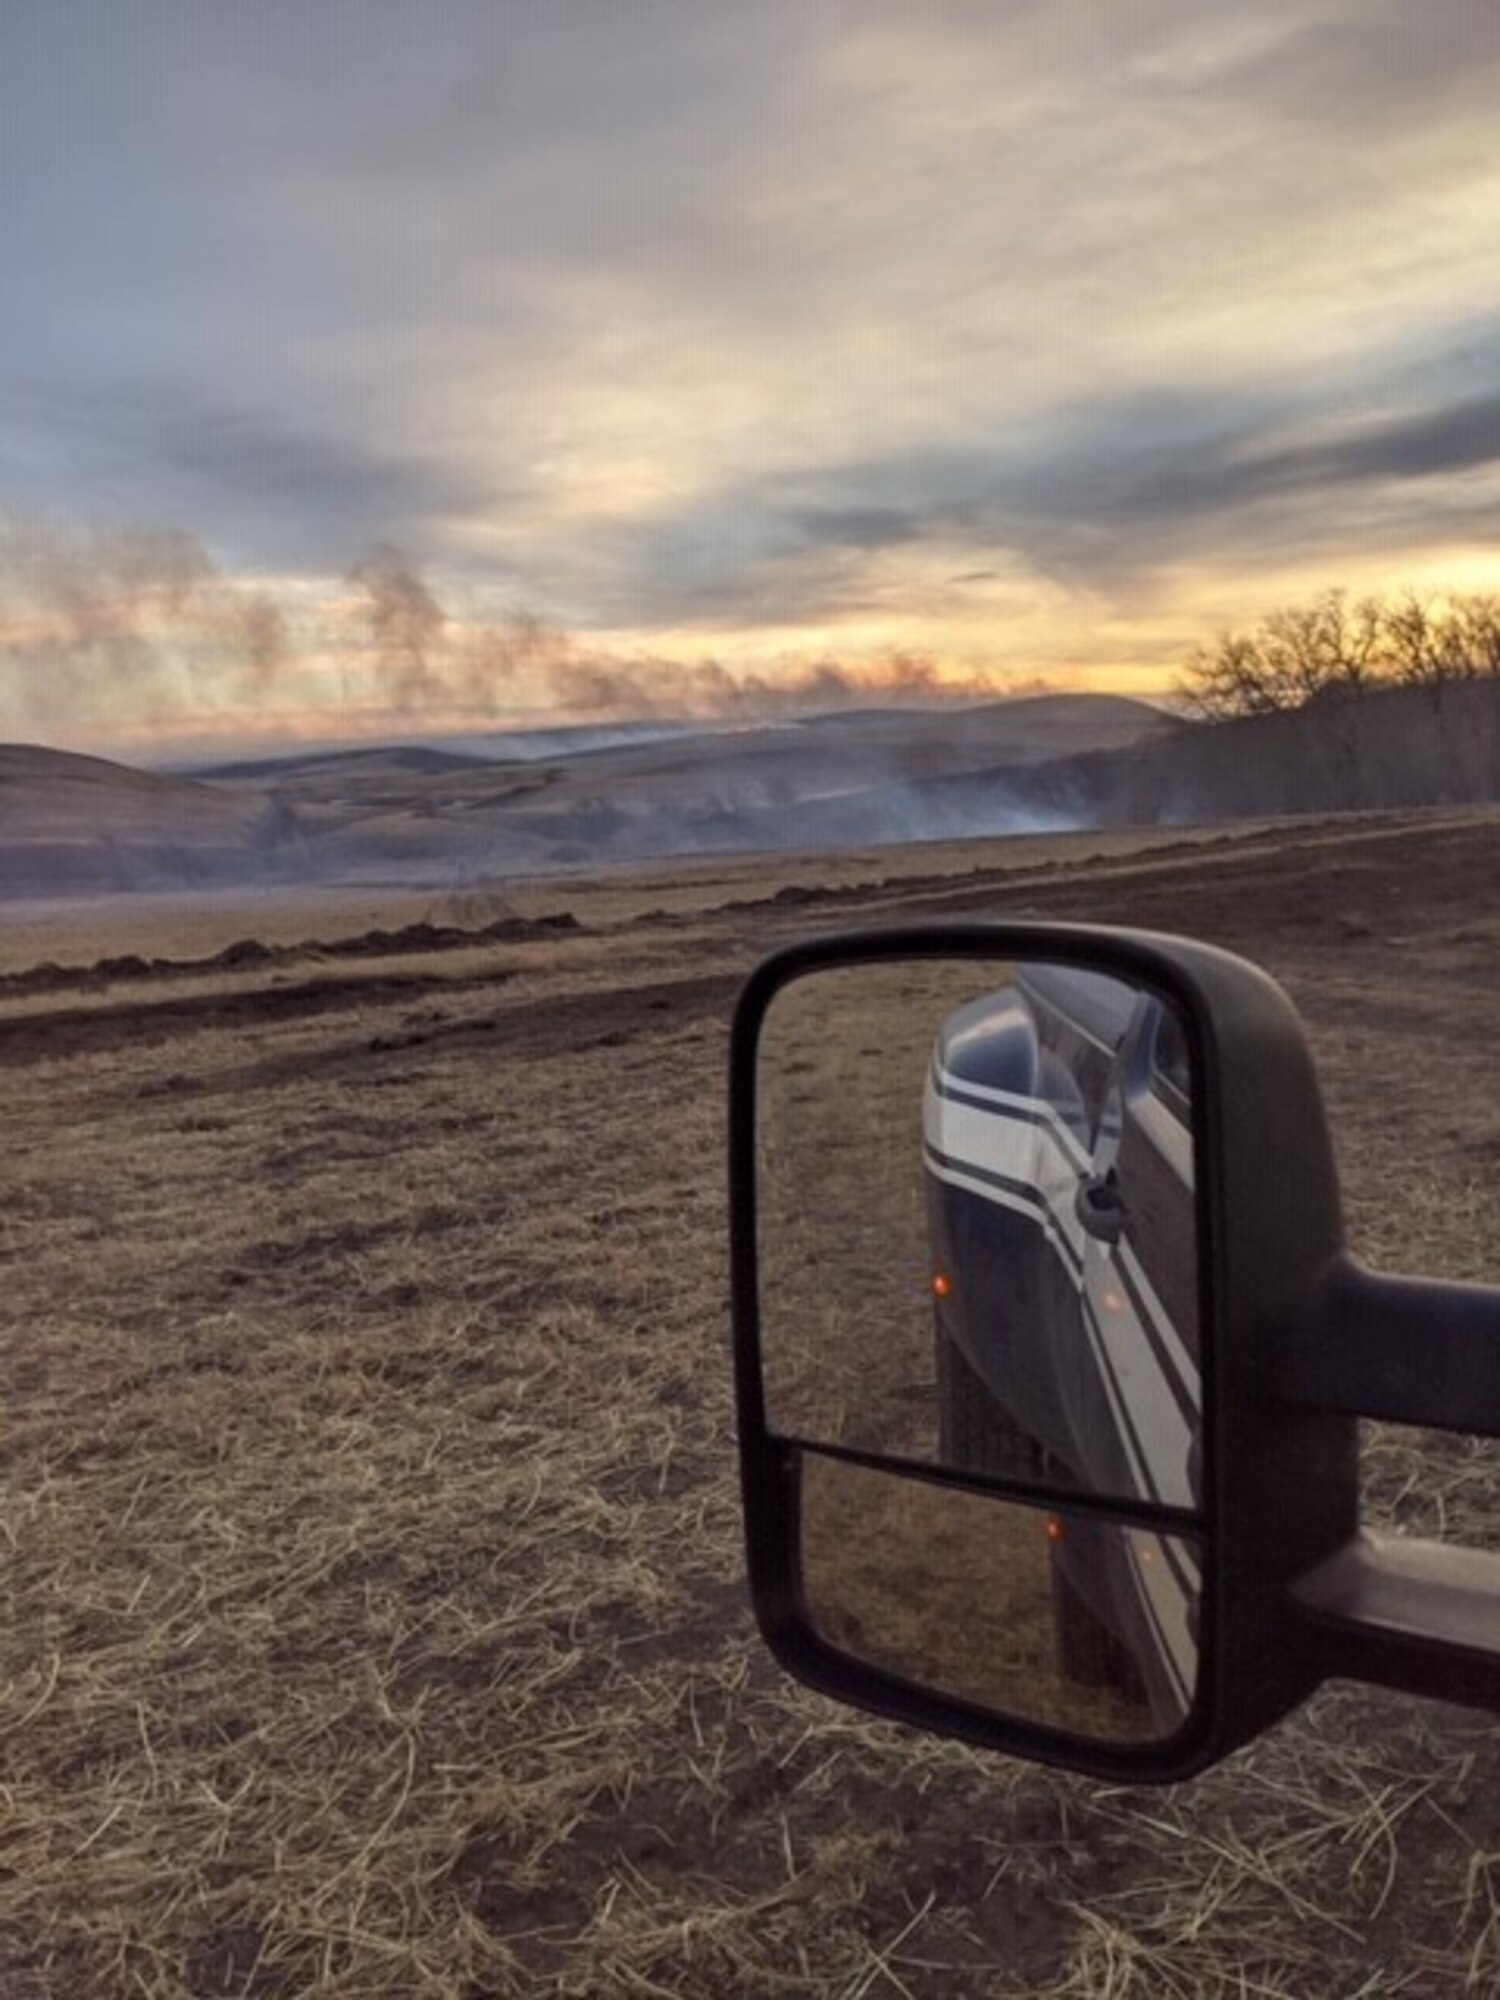 The fire department was dispatched at the request of the Montana Department of Natural Resources and Conservation with a volunteer fire department to support a fast-moving grass fire north of Geyser, Montana, Feb. 1, 2020.